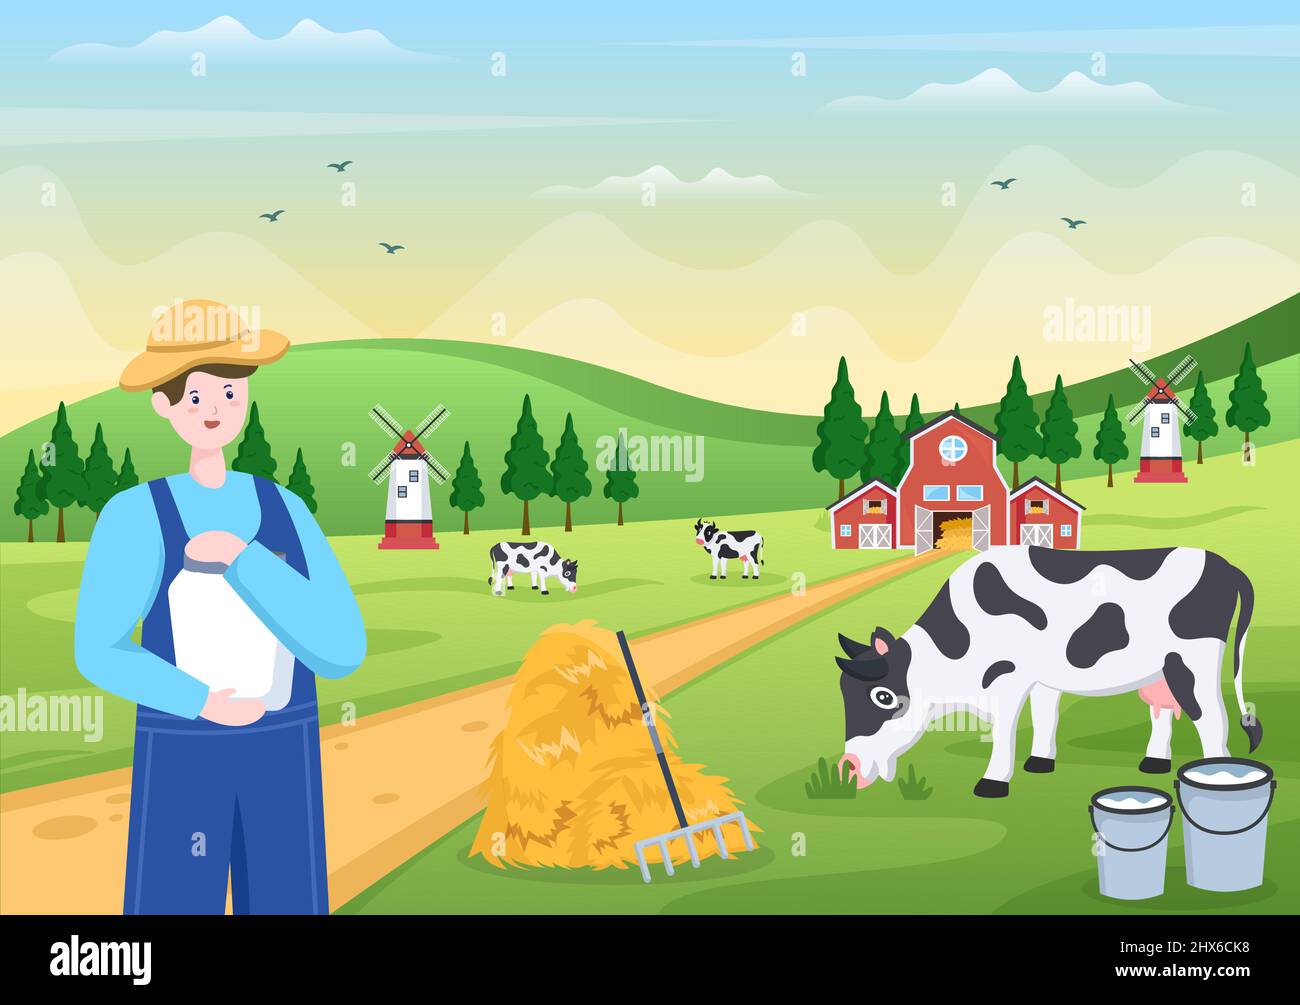 Farmers are Milking Cows to Produce or Obtain Milk with Views of Green Meadows or on Farms in an Illustration Flat Style Stock Vector